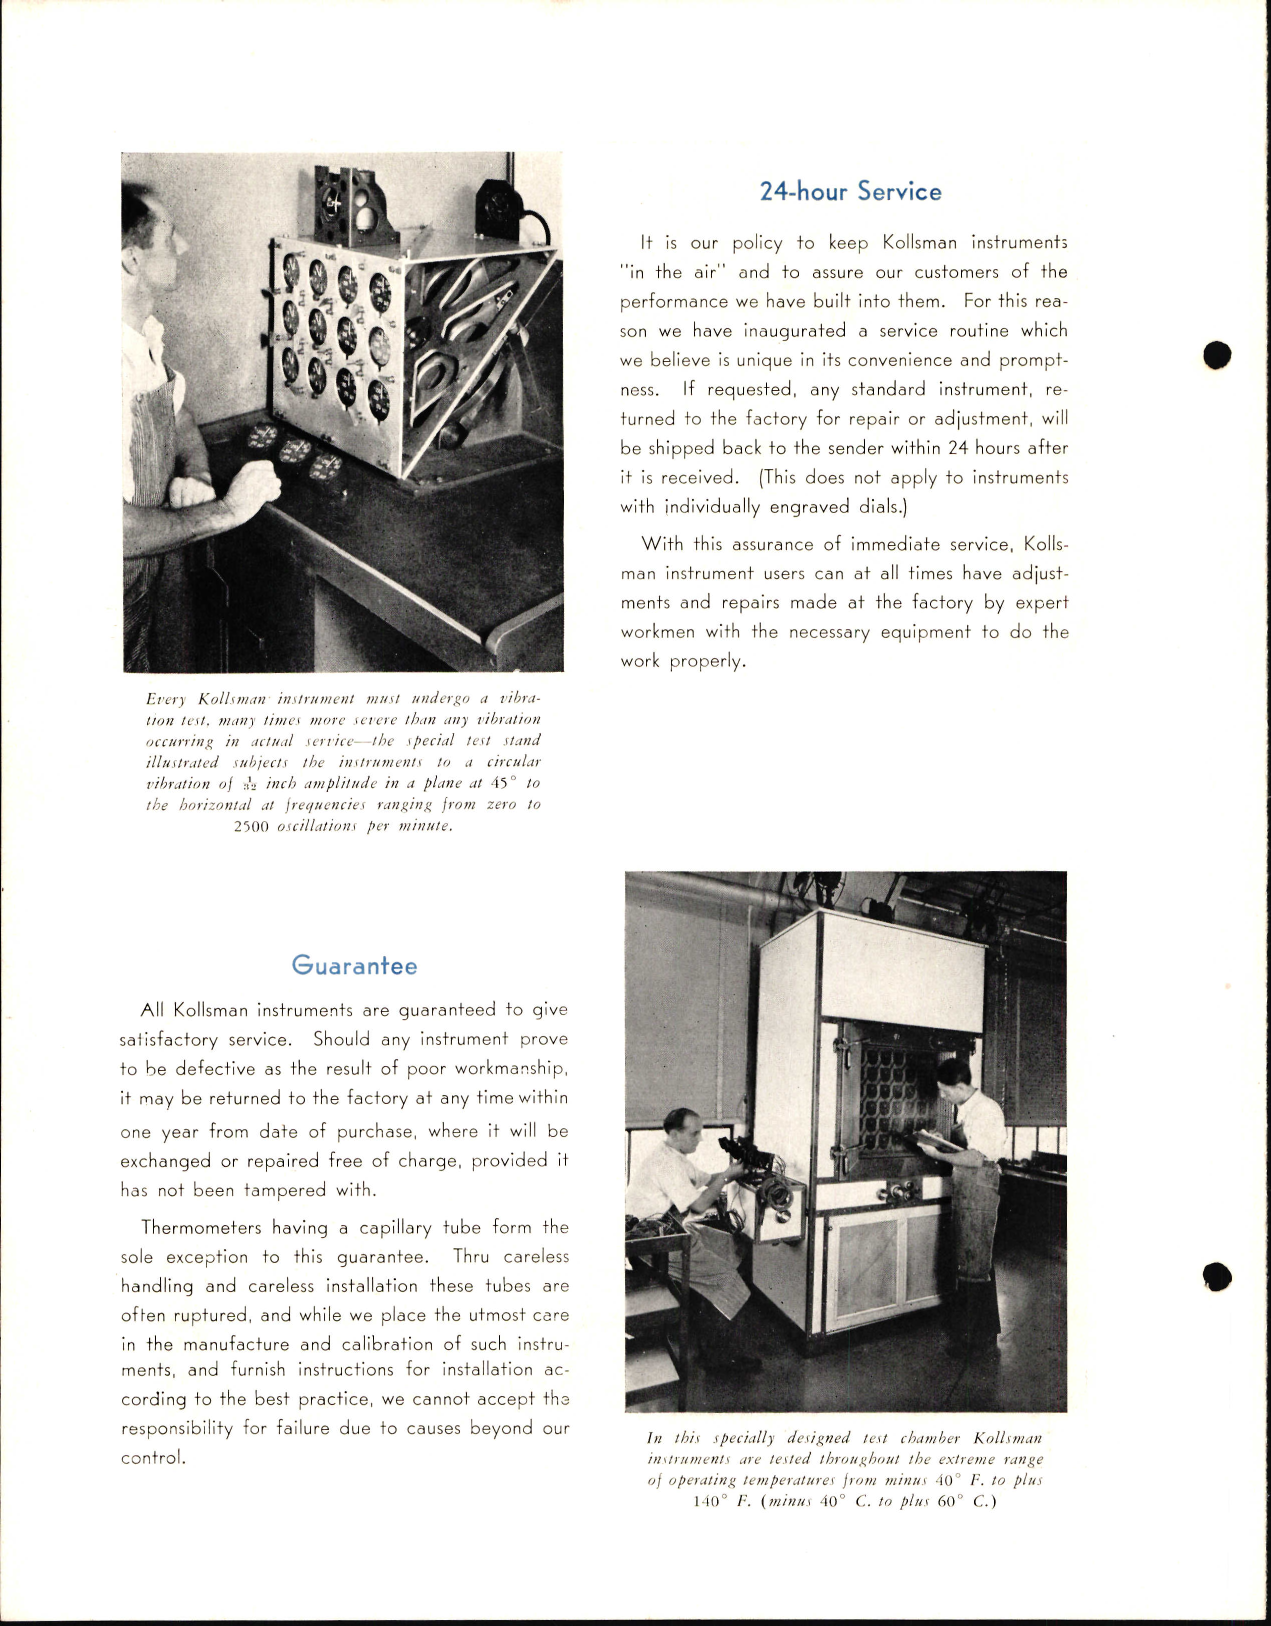 Sample page 6 from AirCorps Library document: Kollsman Precision Aircraft Instruments 